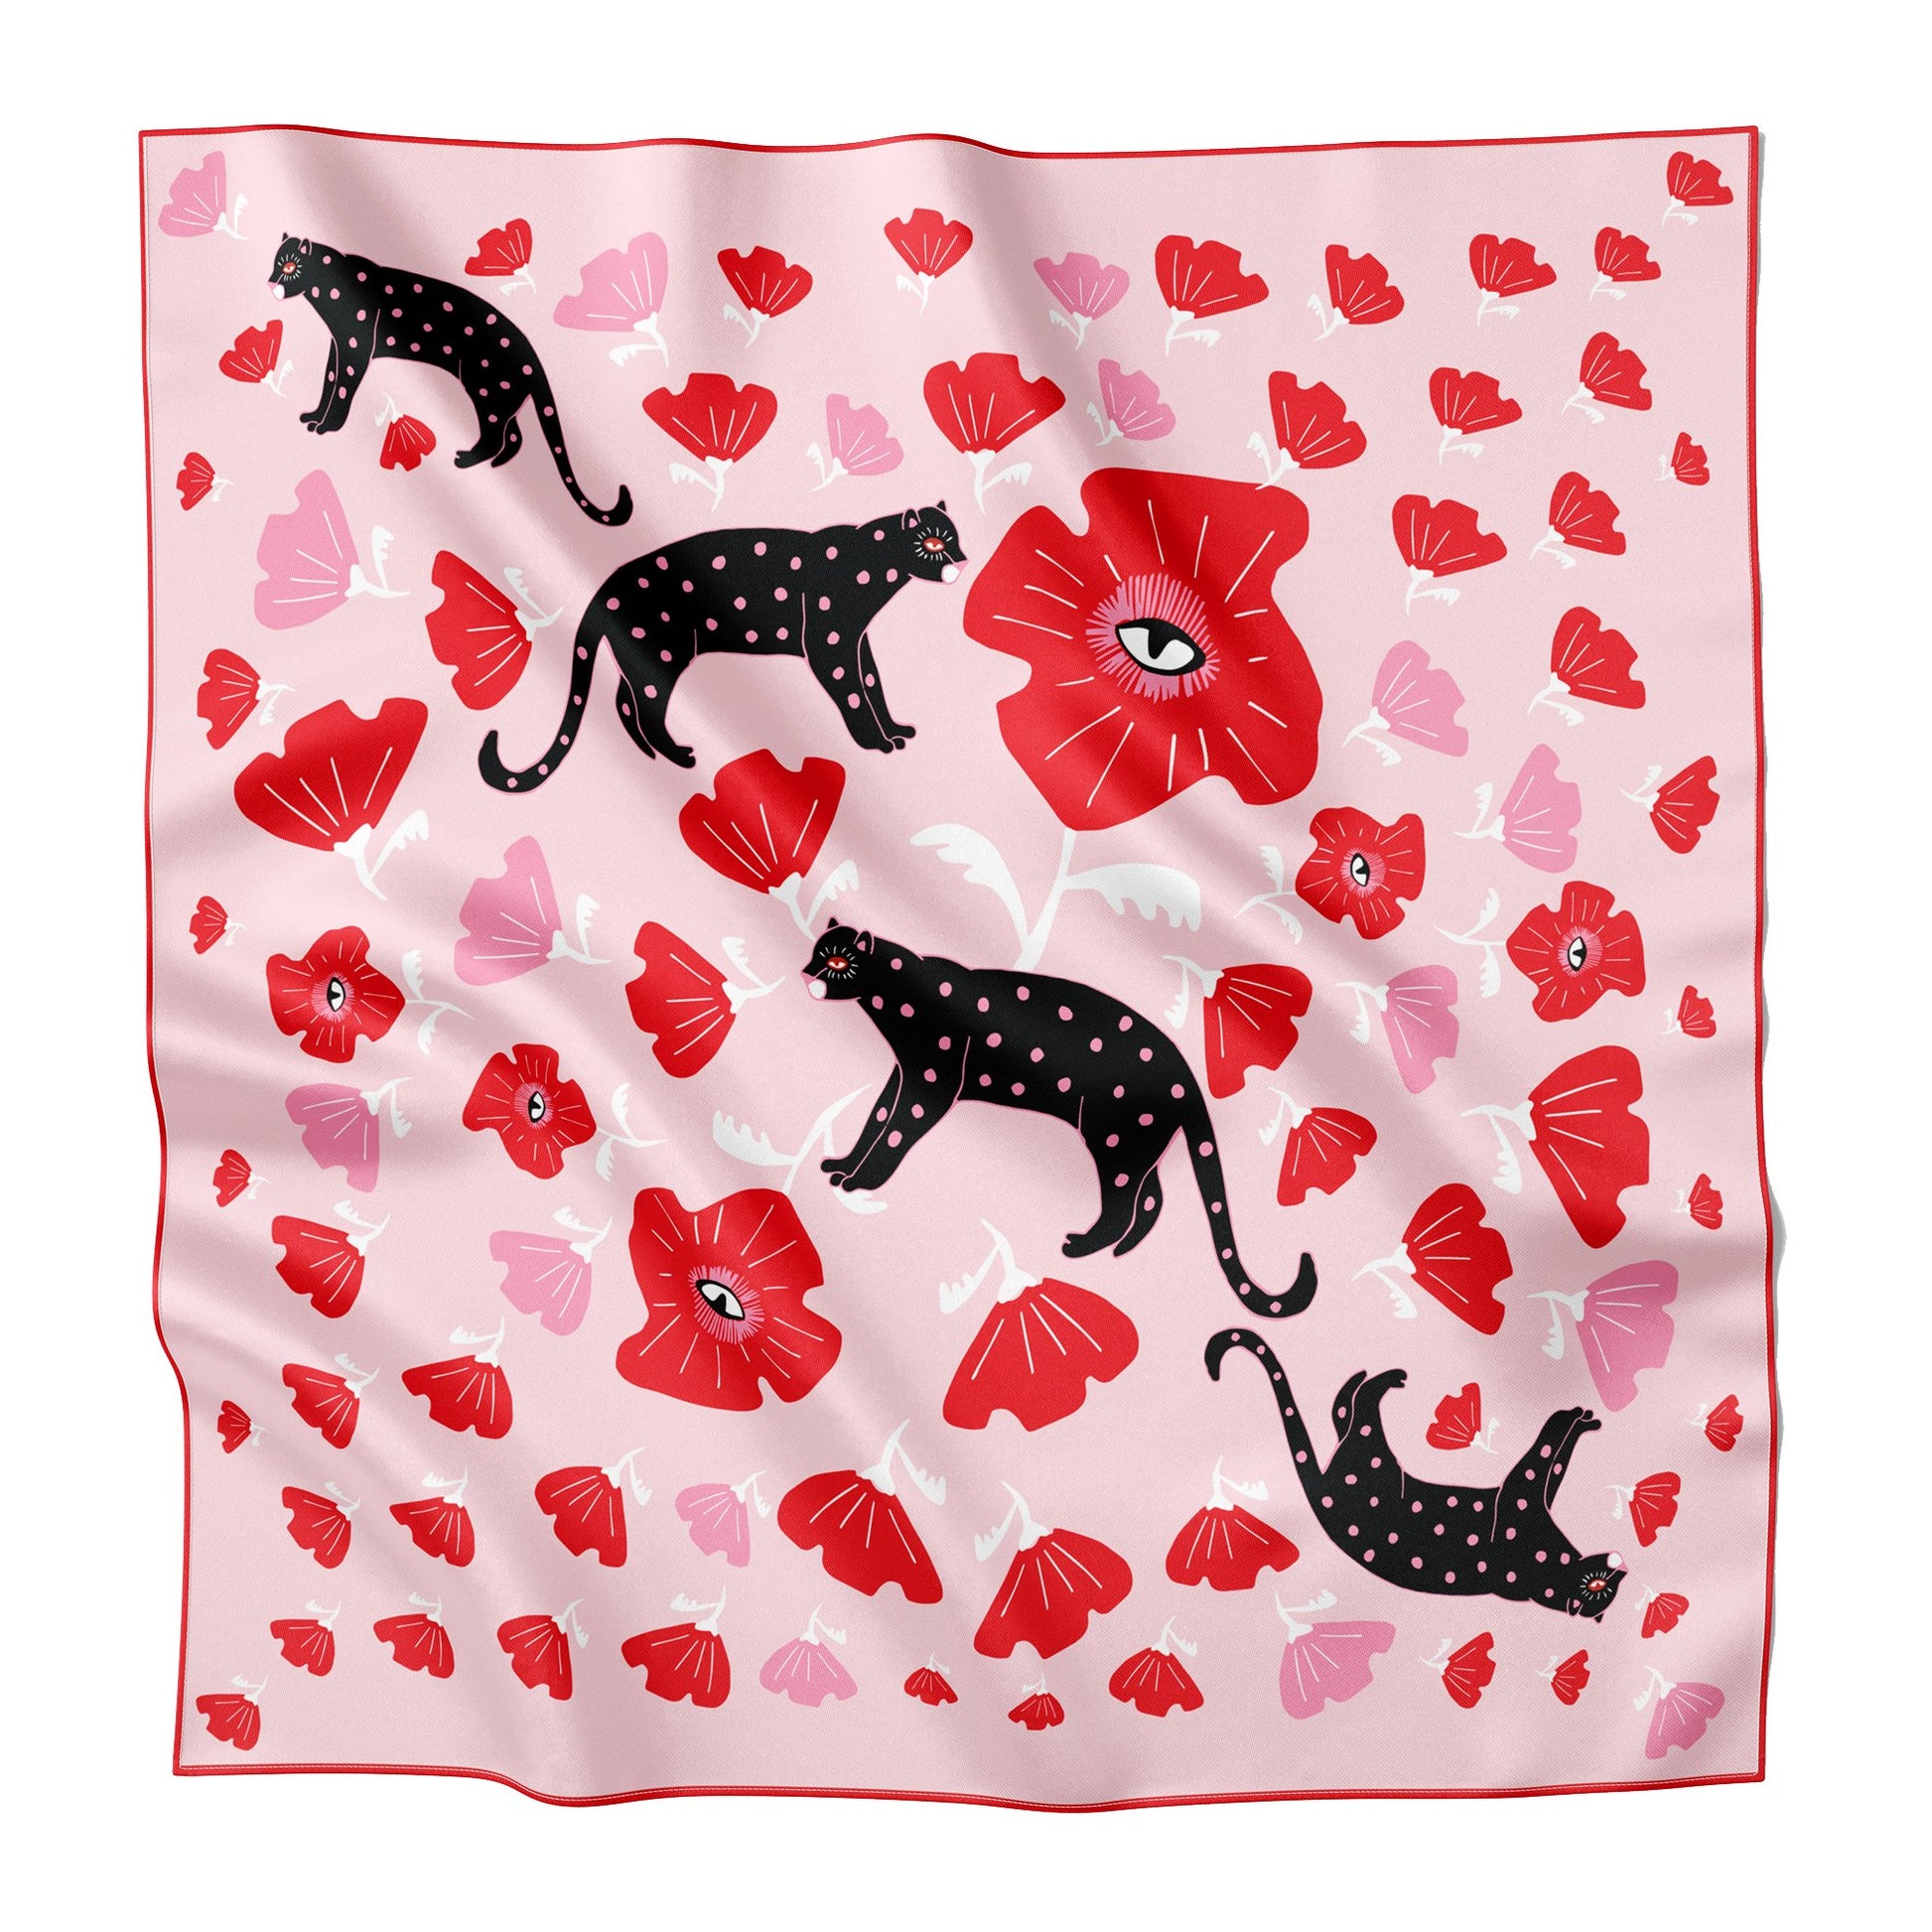 Black cats and red poppies on a silk scarf.